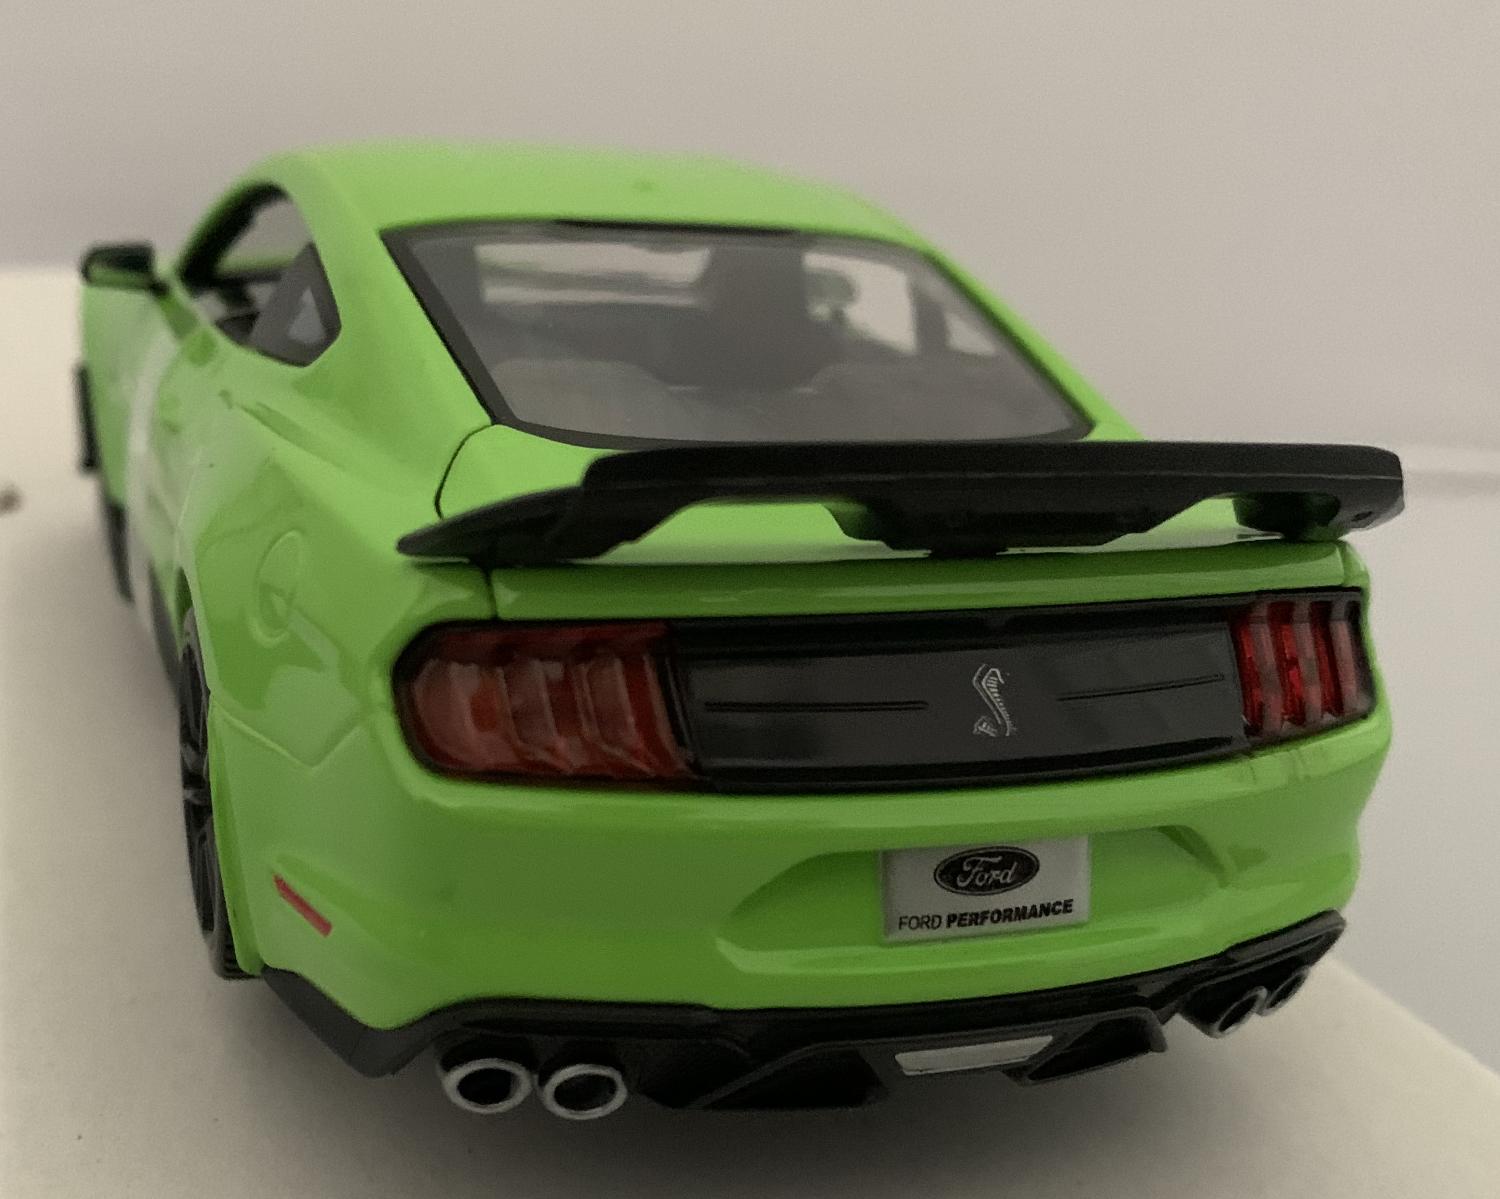 Ford Mustang Shelby GT500 2020 in green 1:24 scale model from Maisto